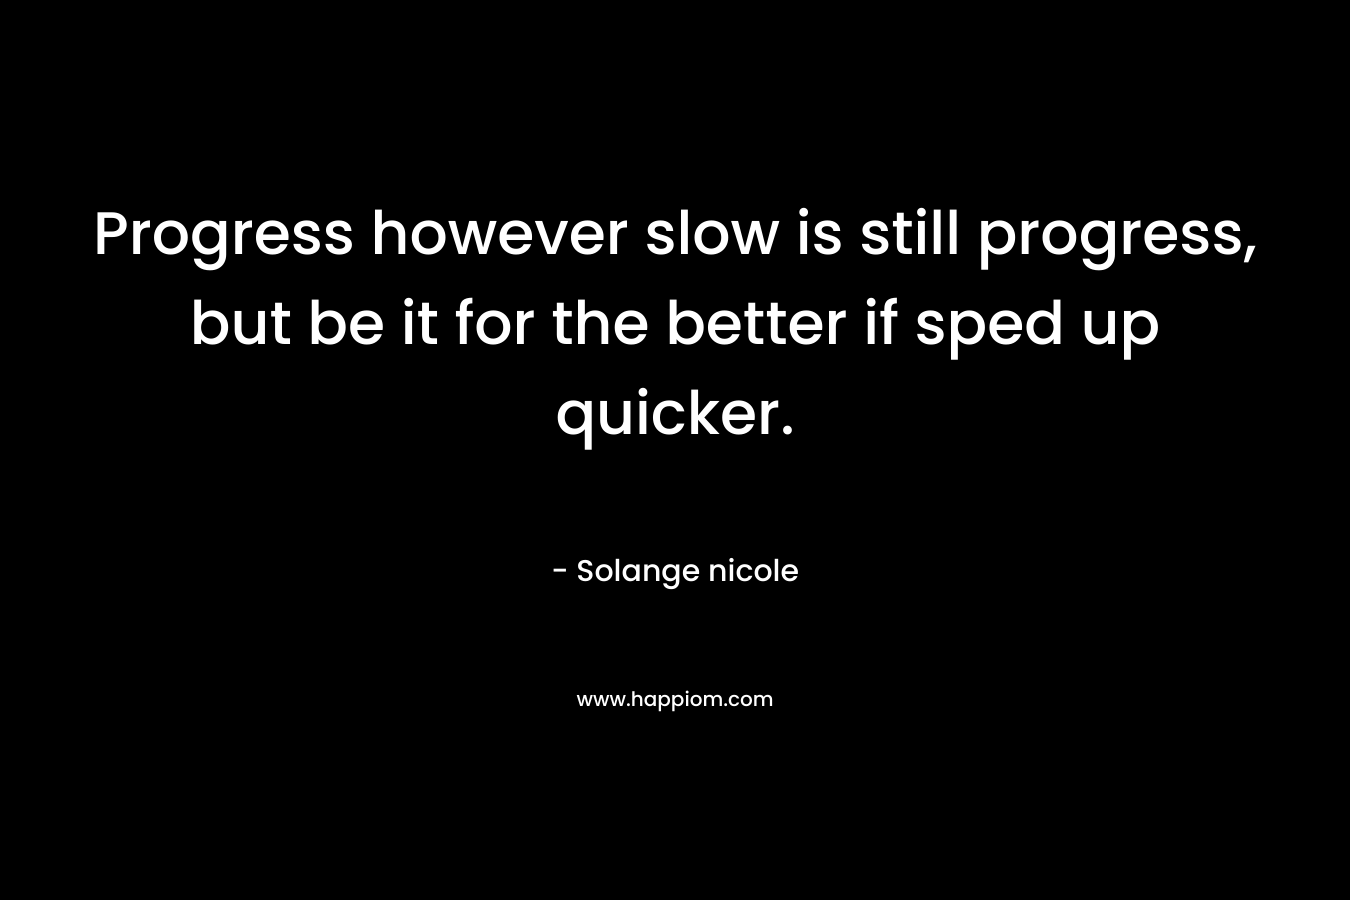 Progress however slow is still progress, but be it for the better if sped up quicker. – Solange nicole